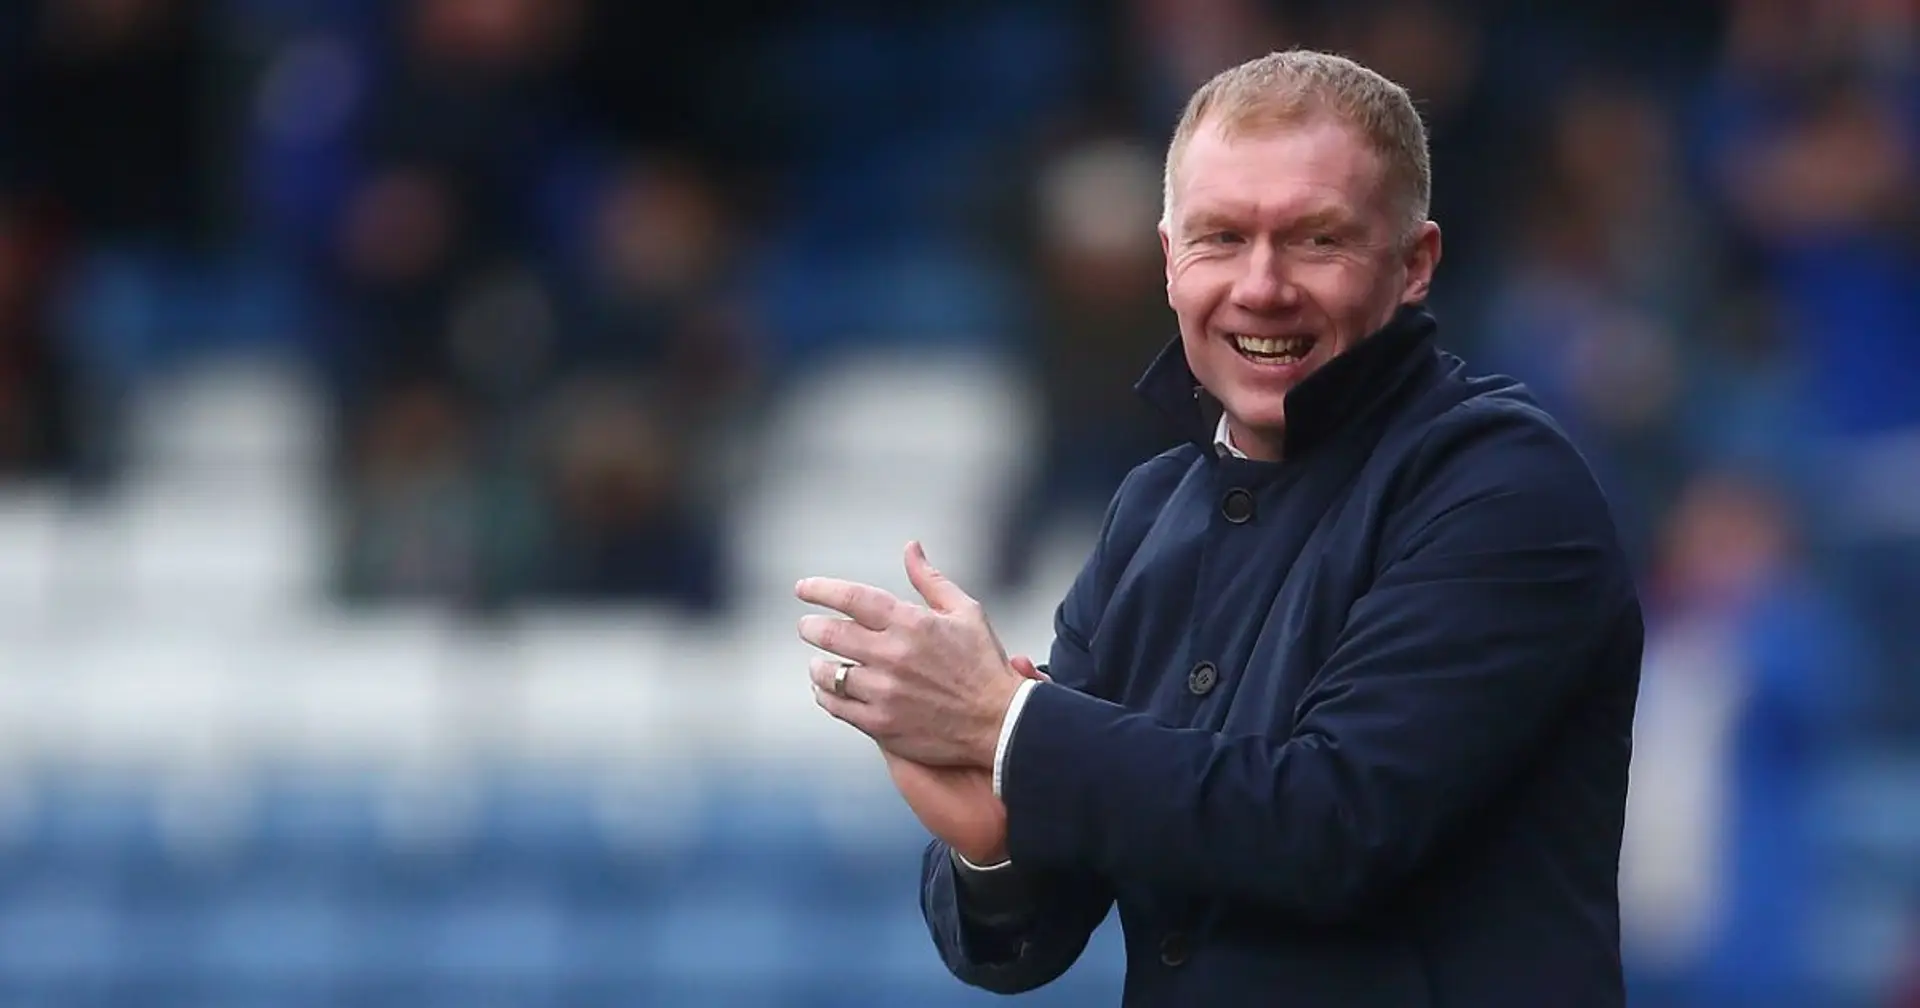 Paul Scholes takes charge of Salford City as interim boss after Graham Alexander sacking 